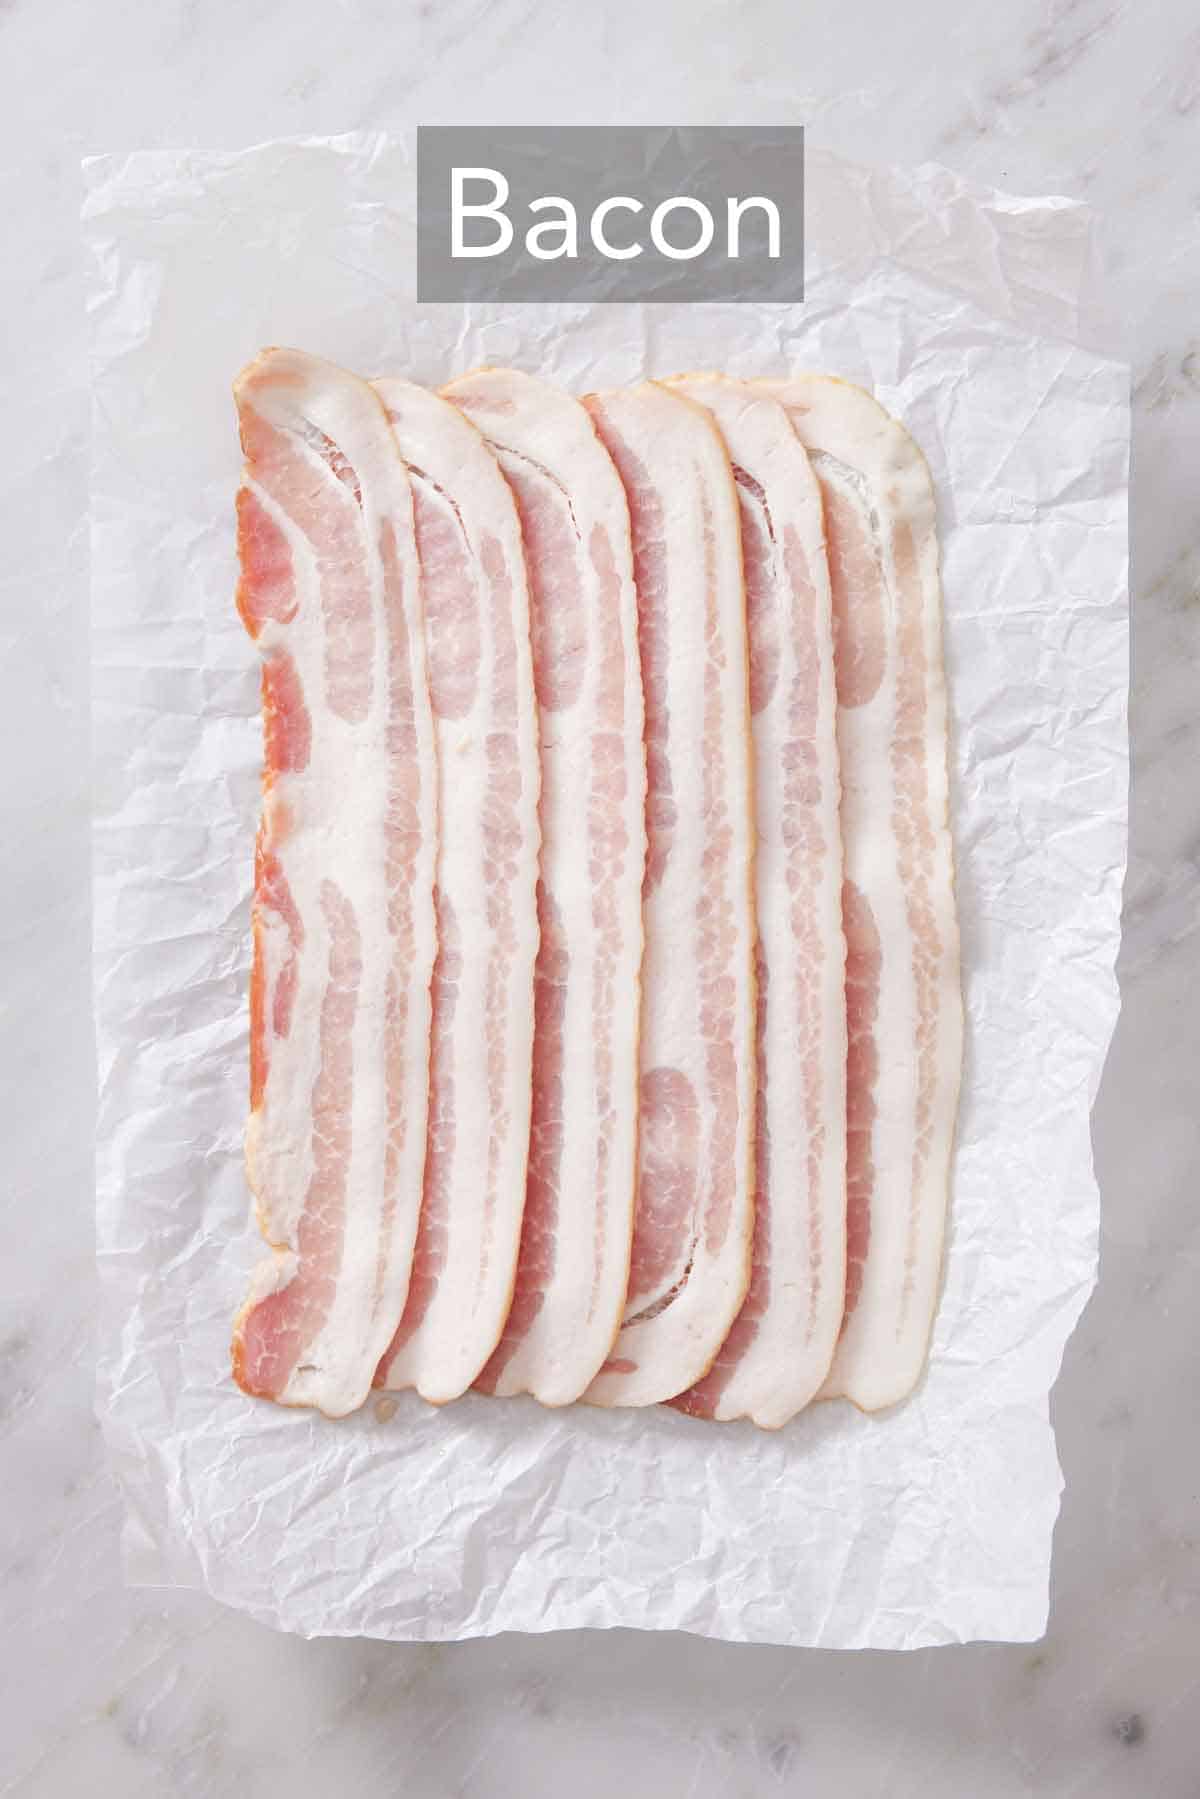 Ingredients needed to make air fryer bacon.